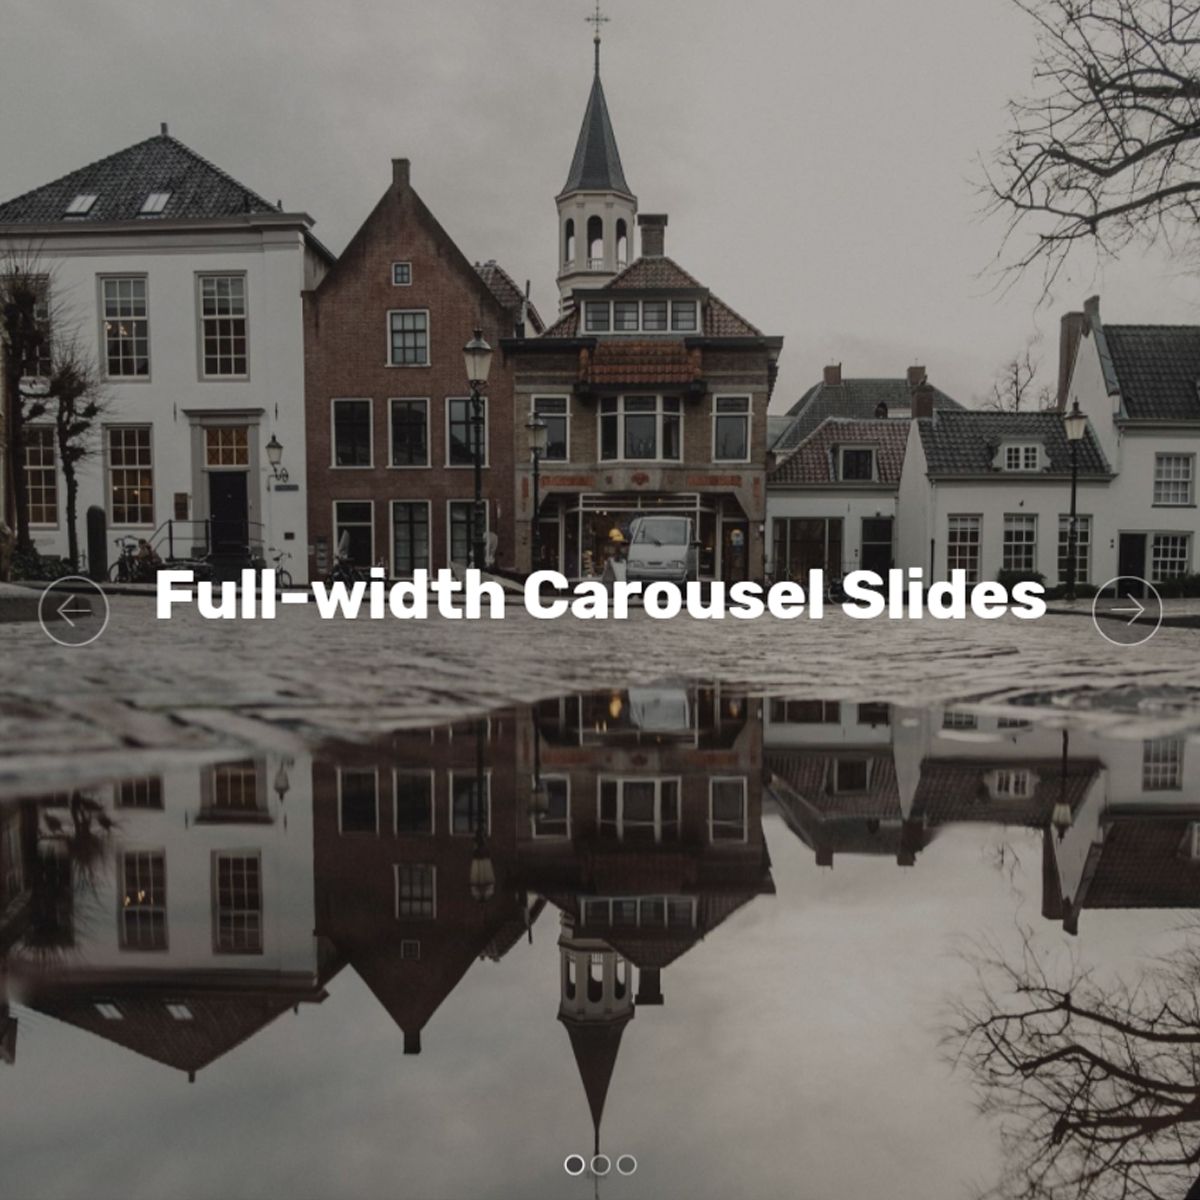 CSS3 Bootstrap Photo Carousel